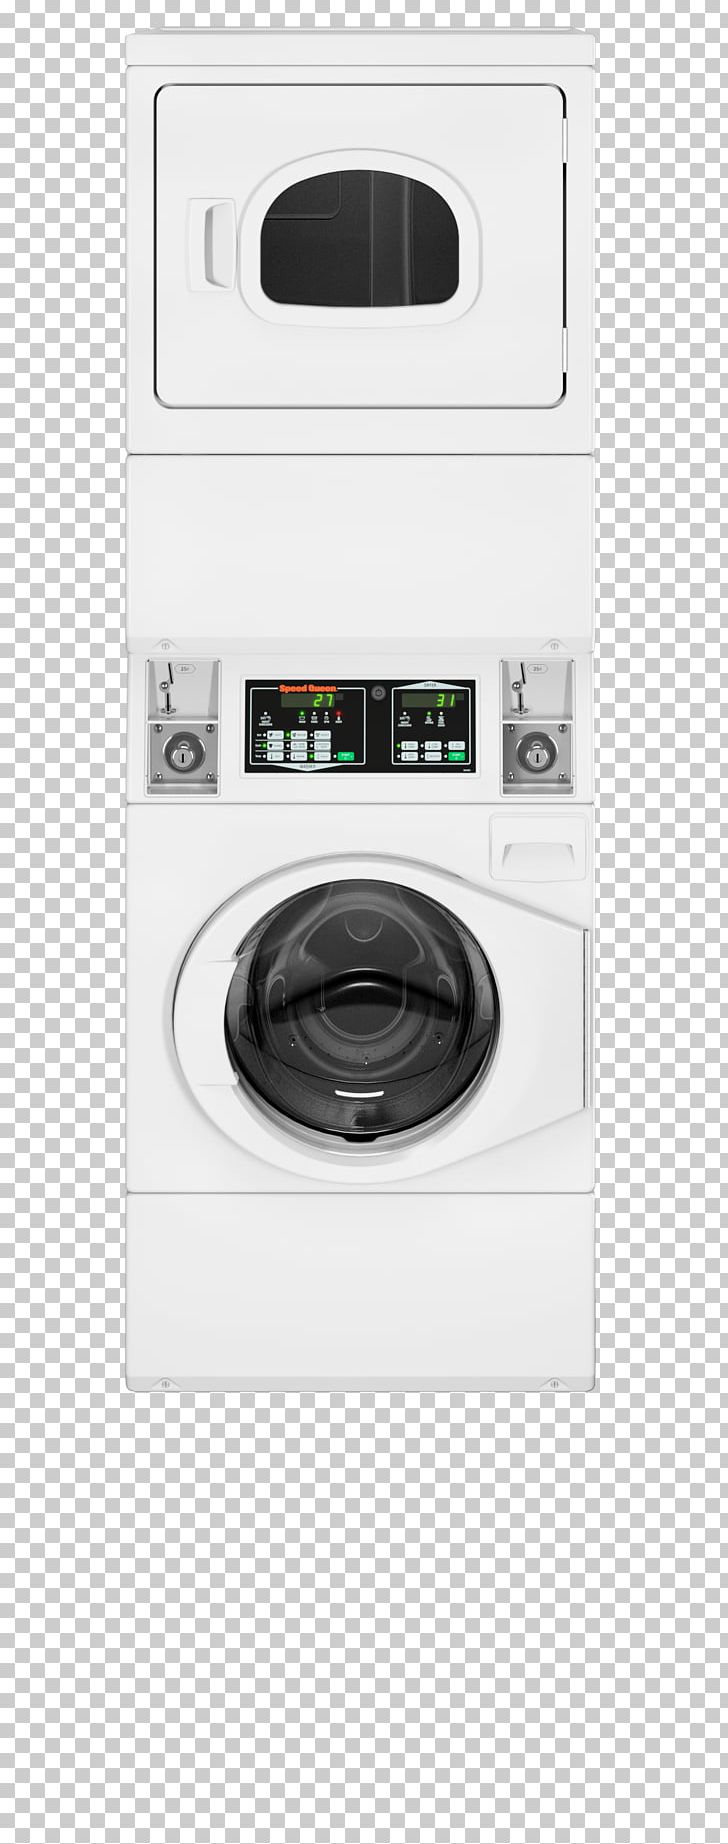 Clothes Dryer Laundry Washing Machines Speed Queen Combo Washer Dryer PNG, Clipart, Clothes Dryer, Combo Washer Dryer, Electronics, Fagor, Hardware Free PNG Download